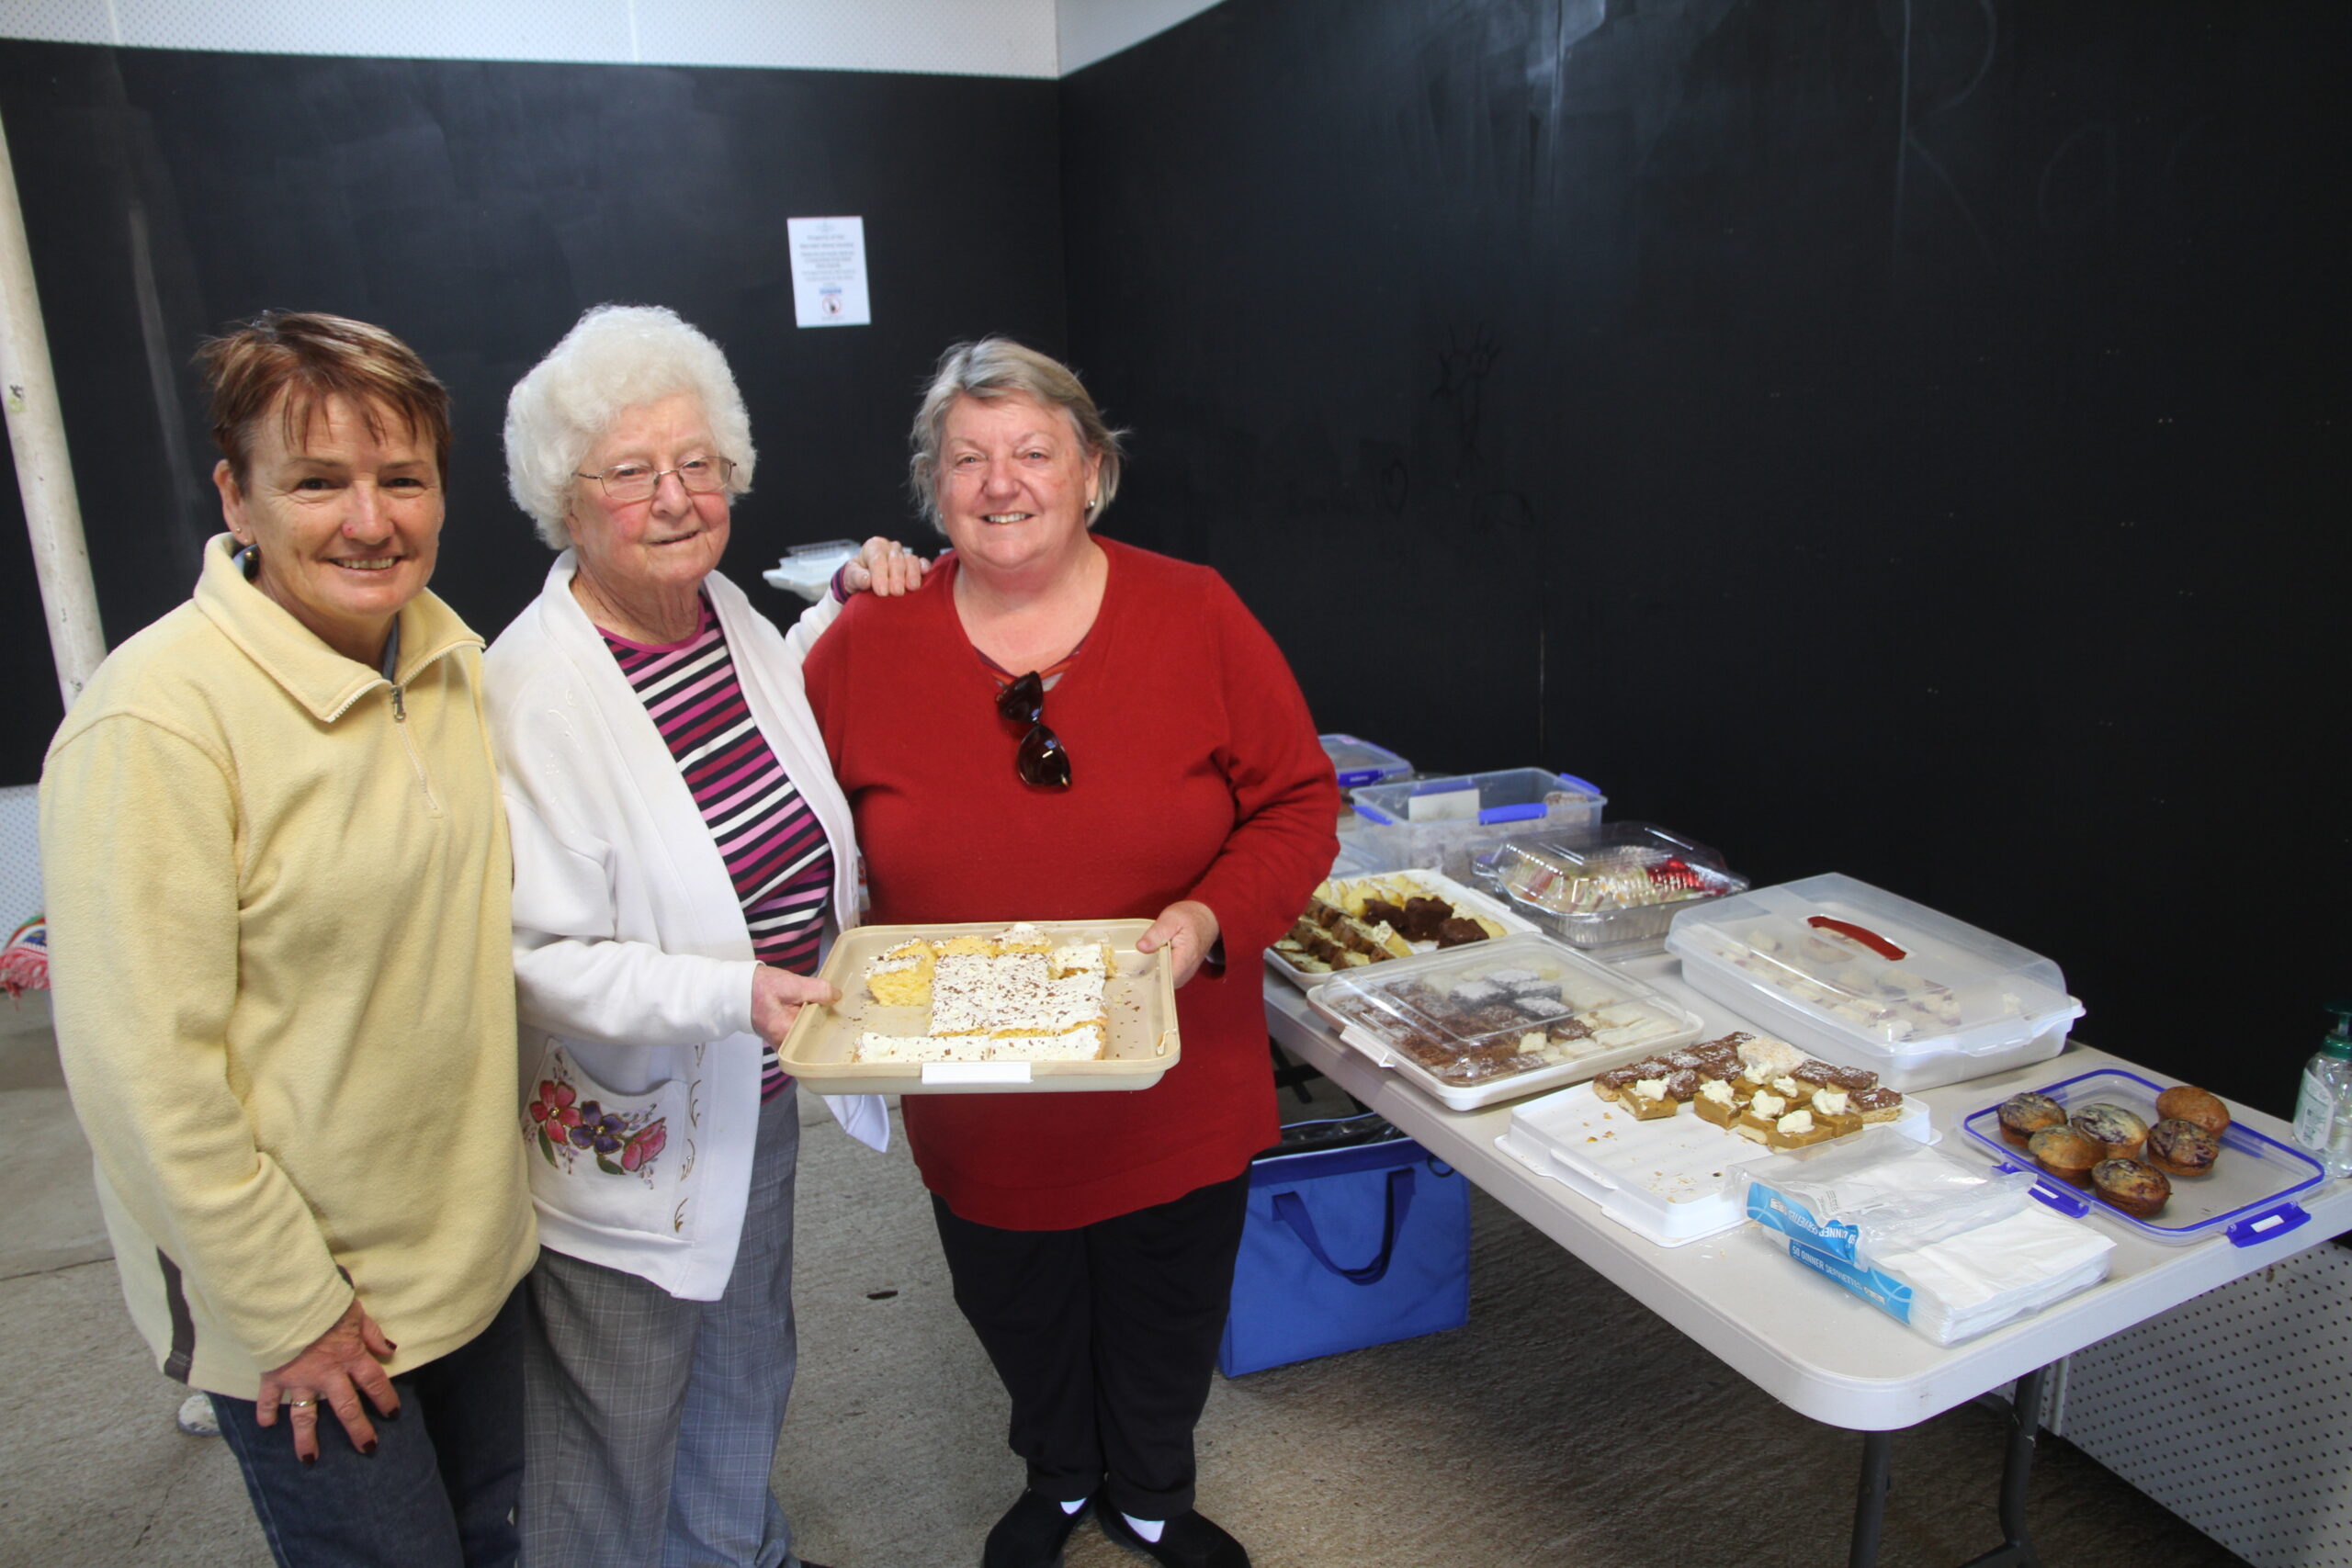 A legendary drawcard for exhibitors from across the region is the Narrabri Poultry Show morning tea pepared by locals and visitors, including Trish Lawty, Heather Stanford and Ann Hine, Uralla.